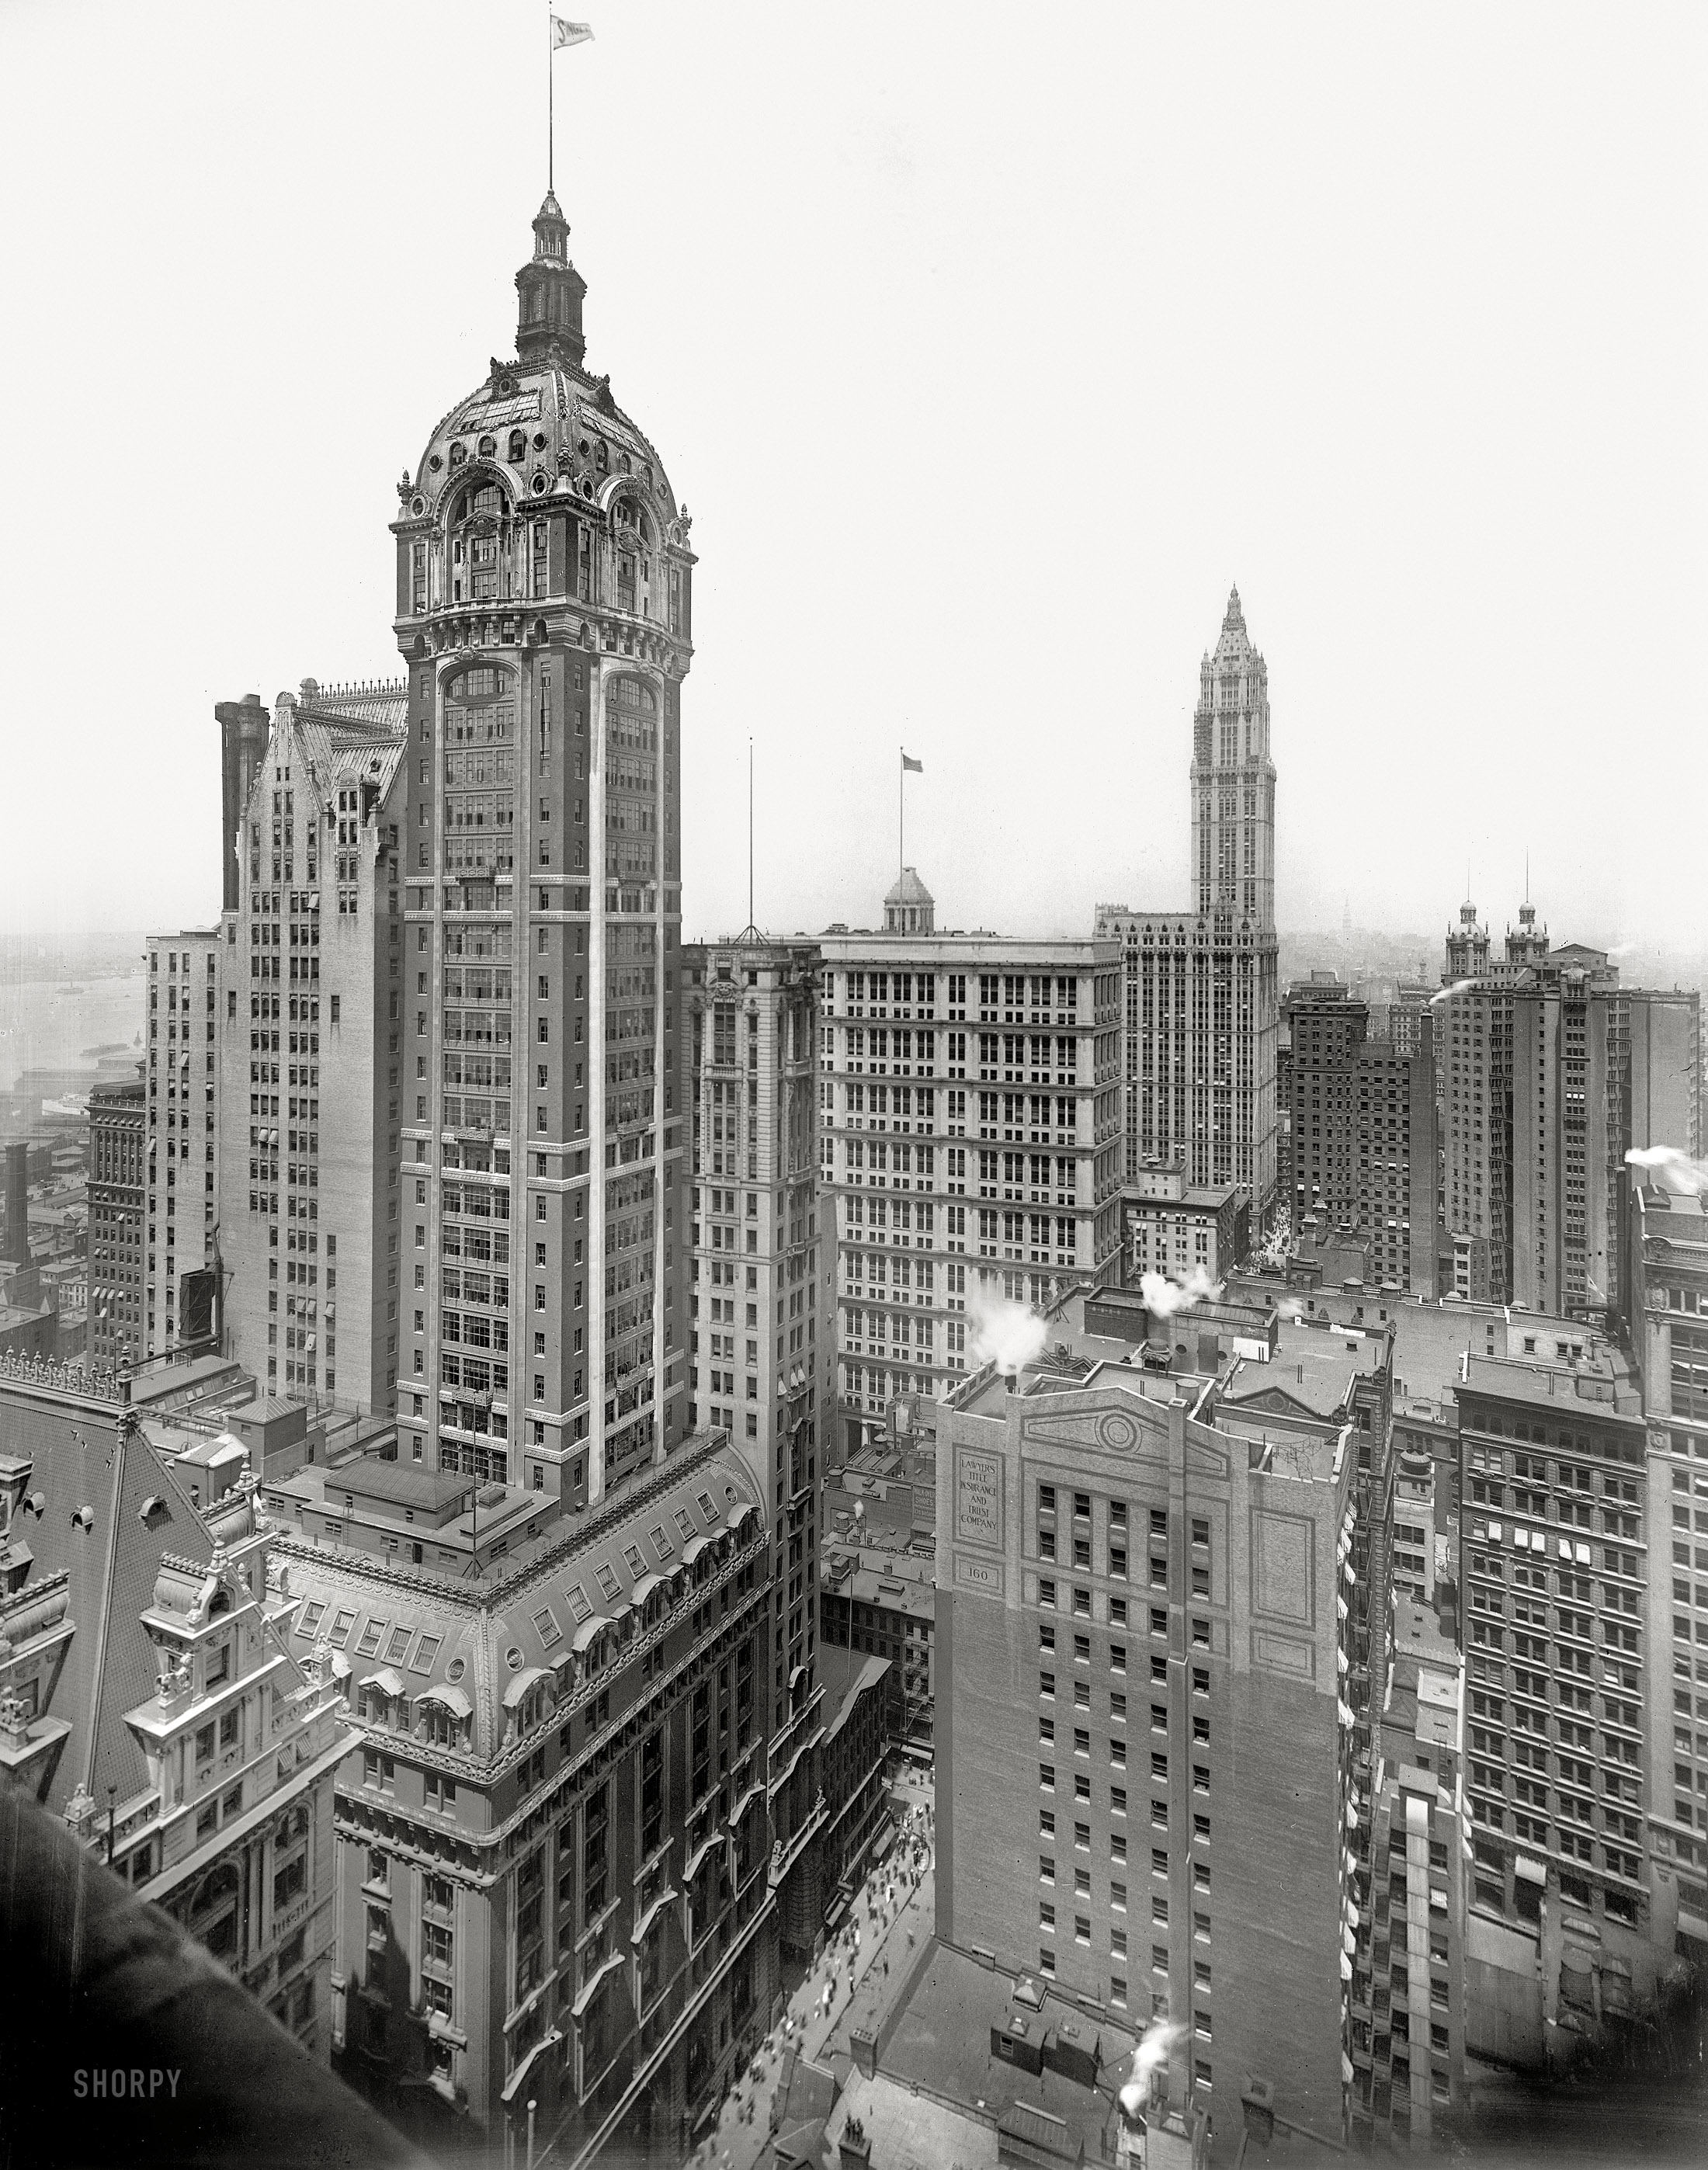 New York circa 1913. "The Singer Building." Rising in the distance, the Woolworth Building under construction. Detroit Publishing Company. View full size.